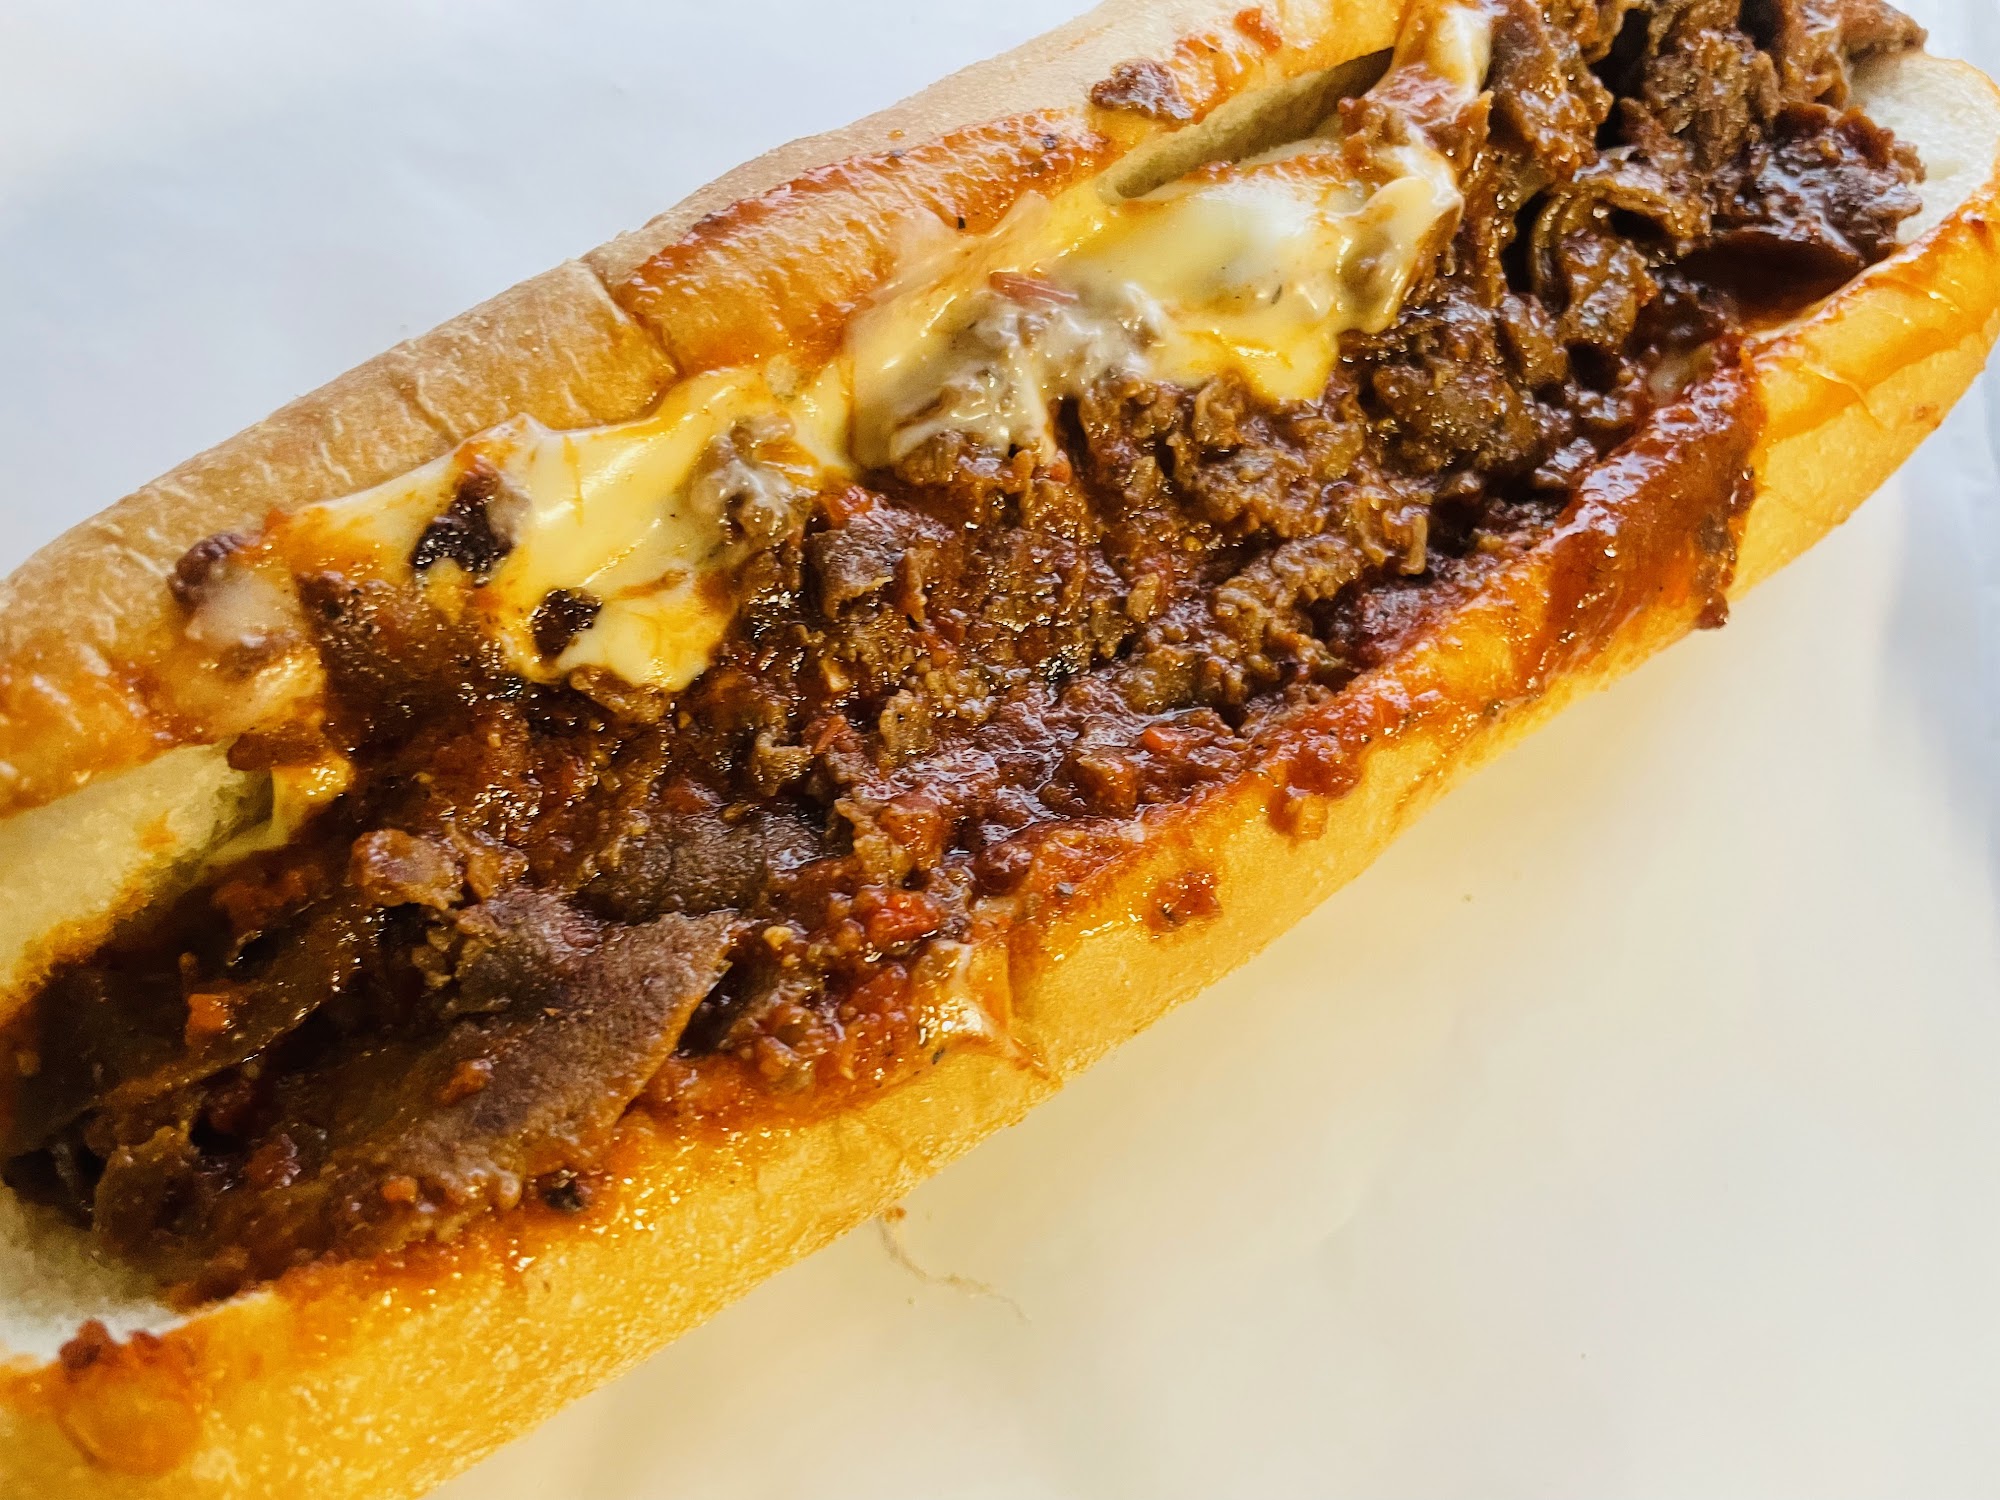 Philly’s Cheesesteaks 215